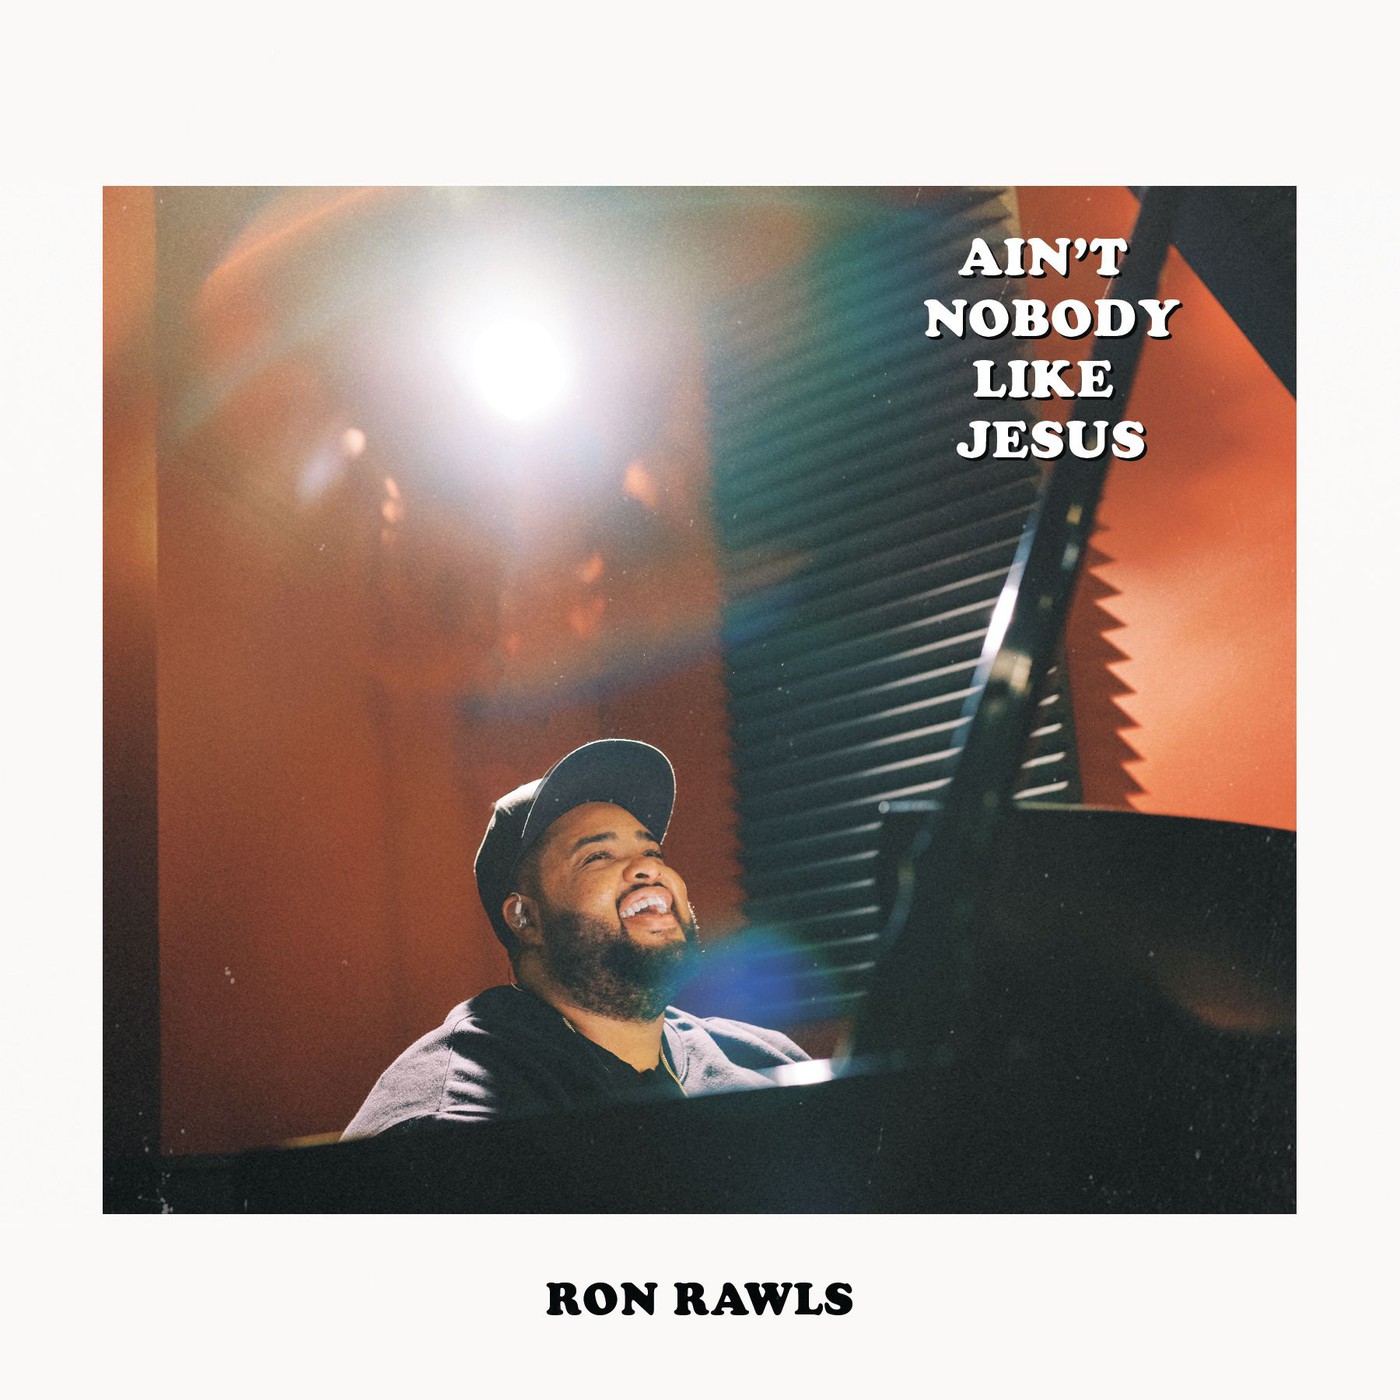 Art for Aint Nobody Like Jesus by Ron Rawls